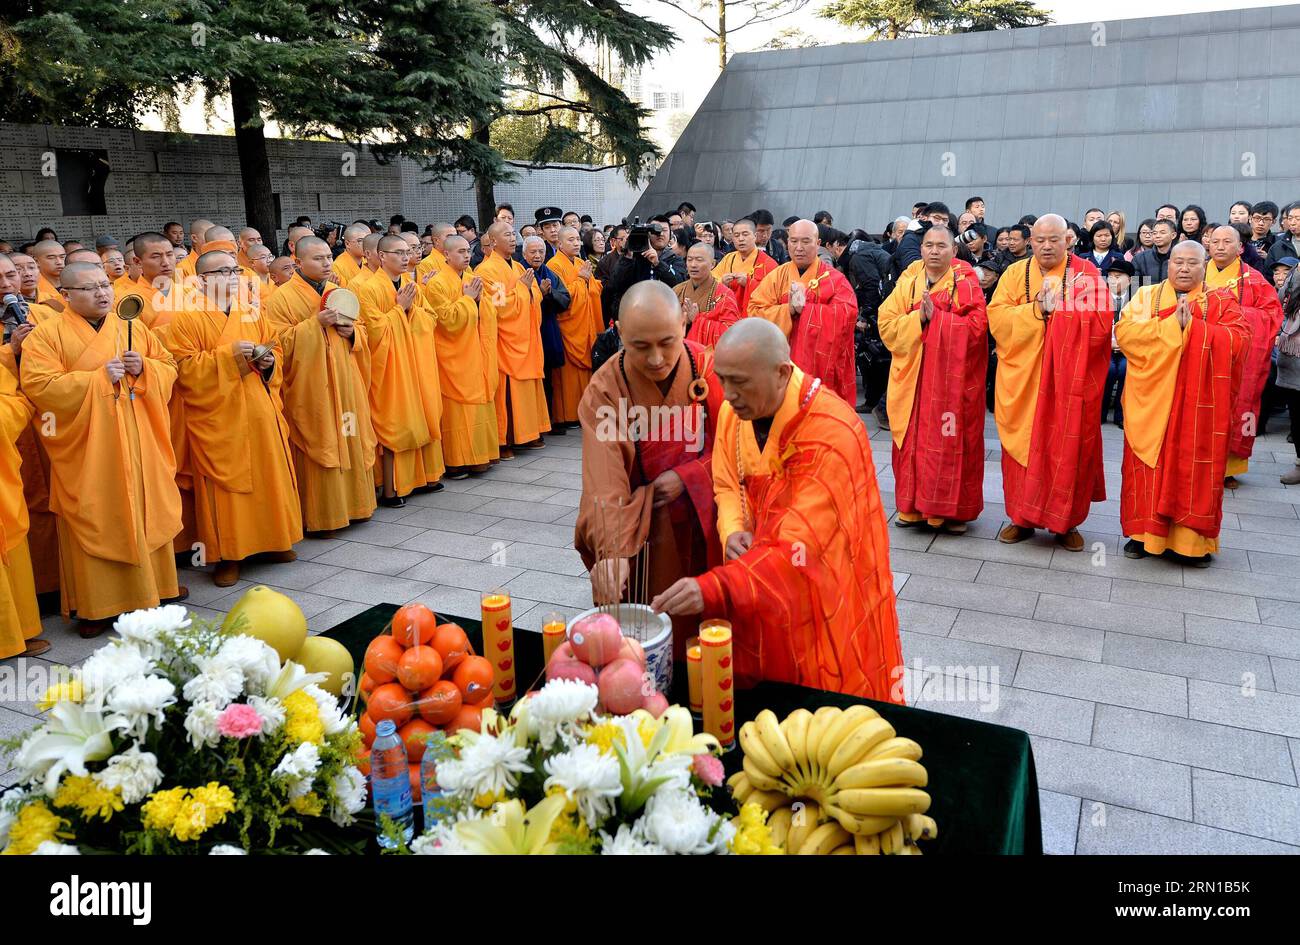 Monks from China, Japan and South Korea pray for the victims of Nanjing Massacre during China s first National Memorial Day for Nanjing Massacre Victims in Nanjing, east China s Jiangsu Province, Dec. 13, 2014. In February 2014, China s top legislature designated Dec. 13 as the National Memorial Day for Nanjing Massacre Victims to mourn those killed by Japanese invaders and expose war crimes committed by the Japanese. ) (zkr) CHINA-NANJING MASSACRE VICTIMS-NATIONAL MEMORIAL DAY(CN) ShenxPeng PUBLICATIONxNOTxINxCHN   Monks from China Japan and South Korea Pray for The Victims of Nanjing Massacr Stock Photo